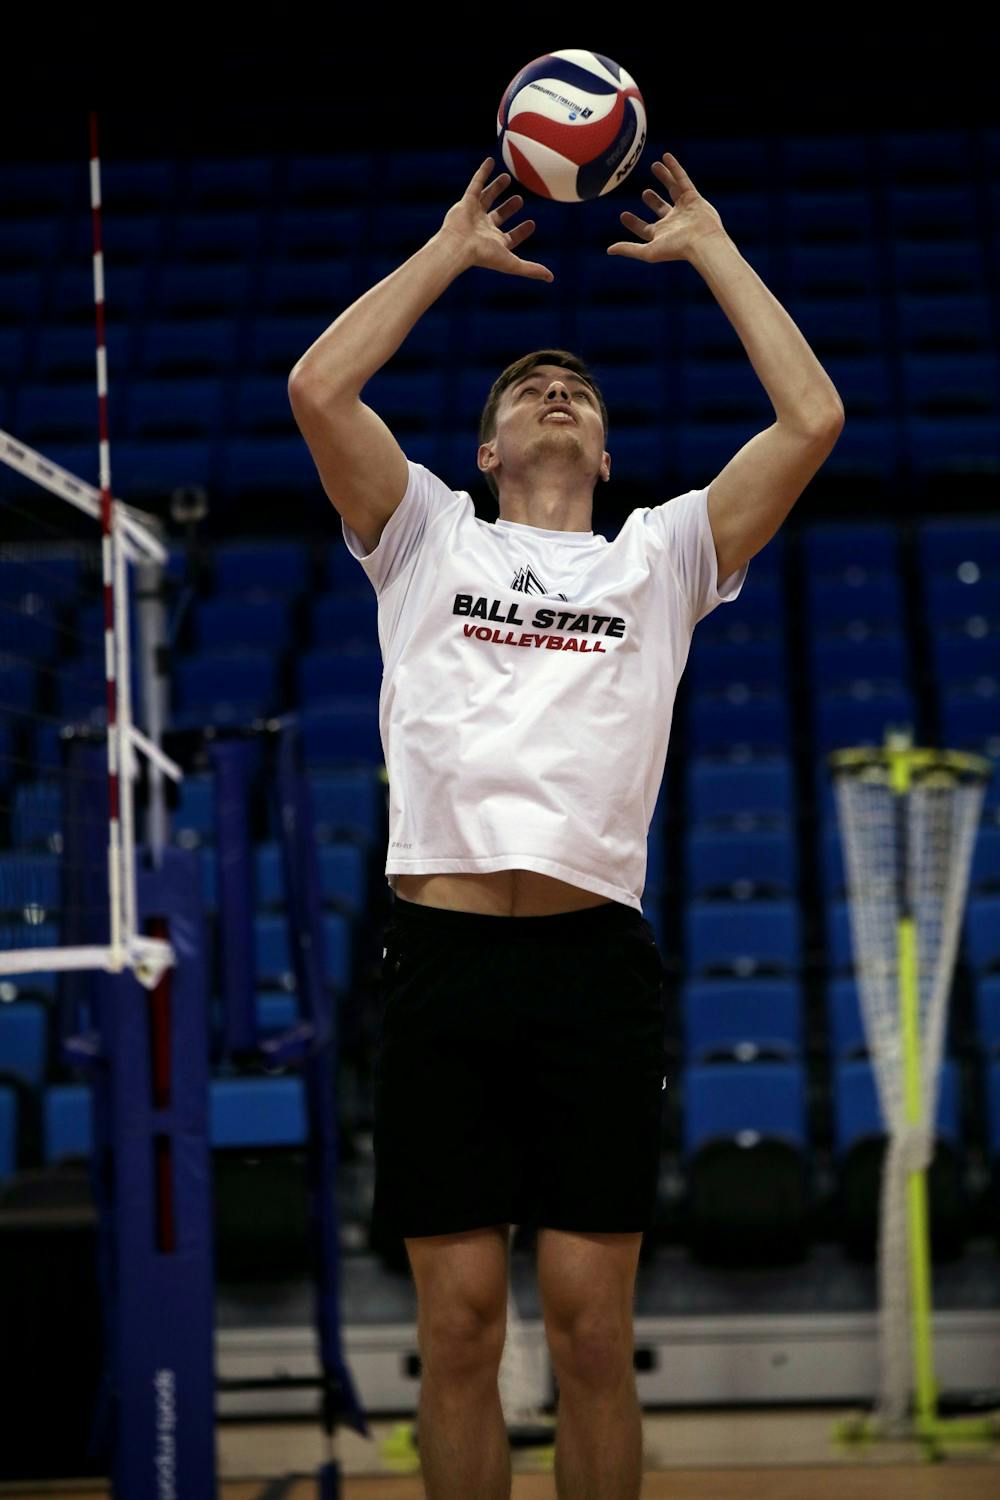 Ball State Men's Volleyball had their final practice before their NCAA Tournament semifinal against the University of Hawaii. The Cardinals defeated the Rainbow Warriors on two separate occasions in the 2022 season, Jan. 19 (3-0) and Jan. 31 (3-2).